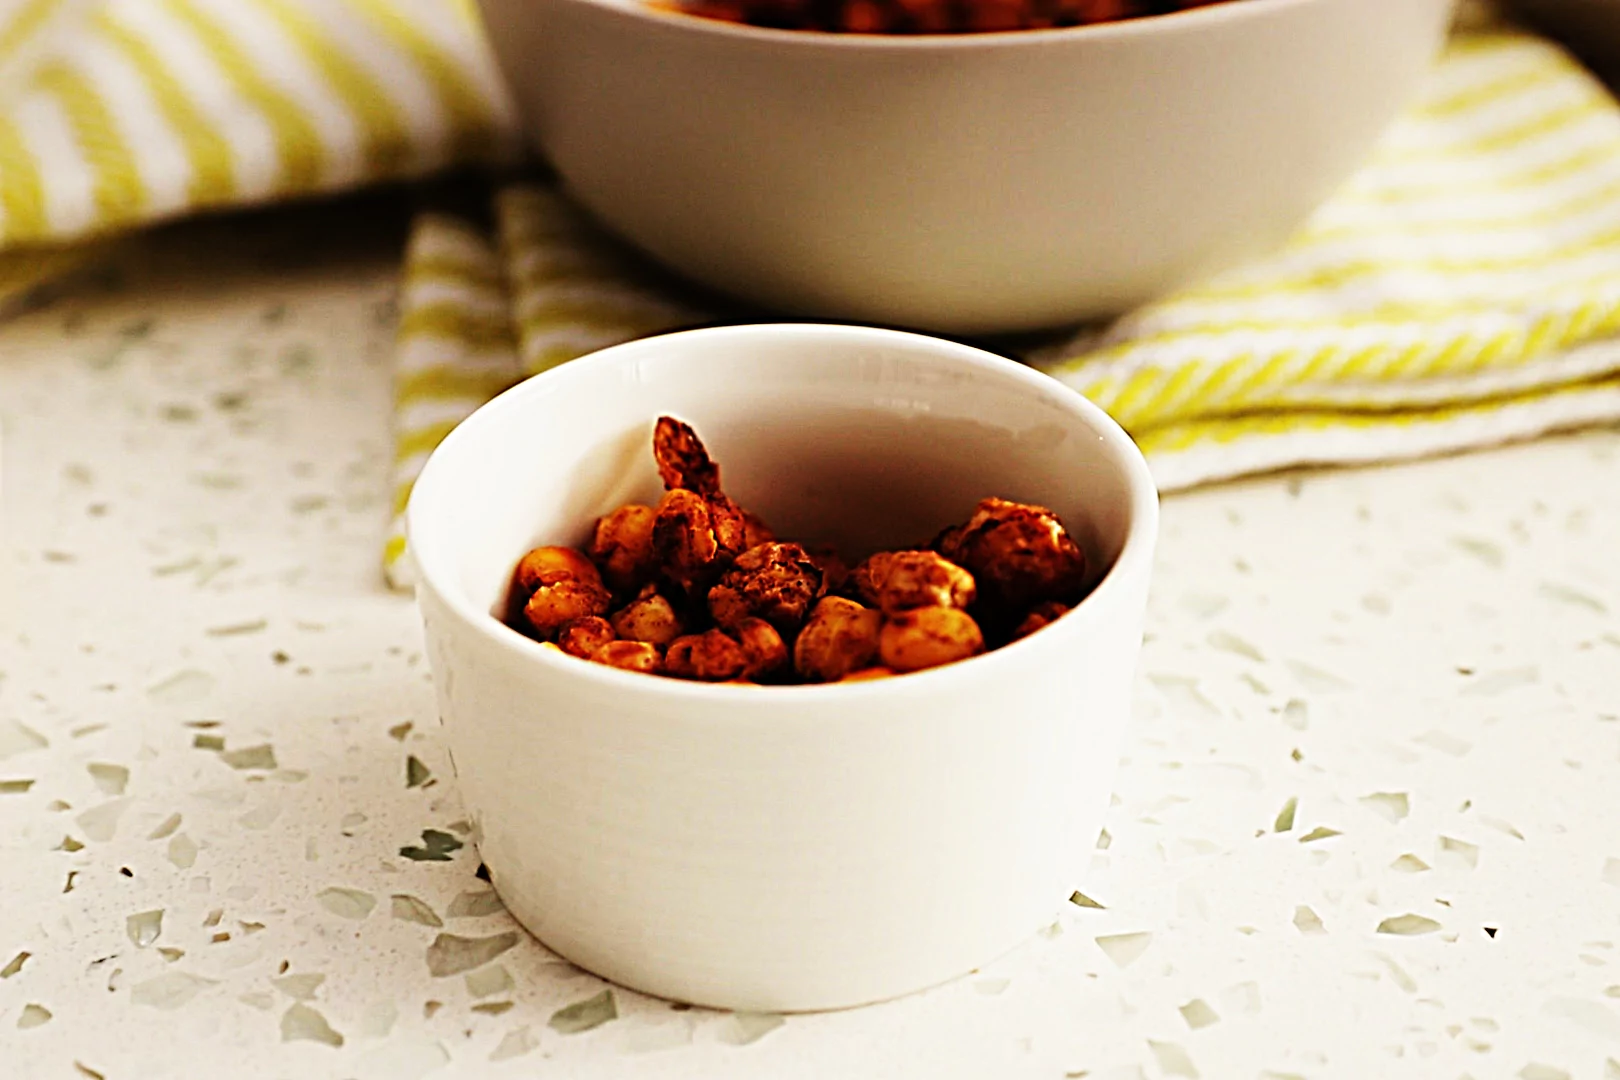 Stupid-Easy Recipe for Honey-Roasted Chickpeas (#1 Top-Rated)